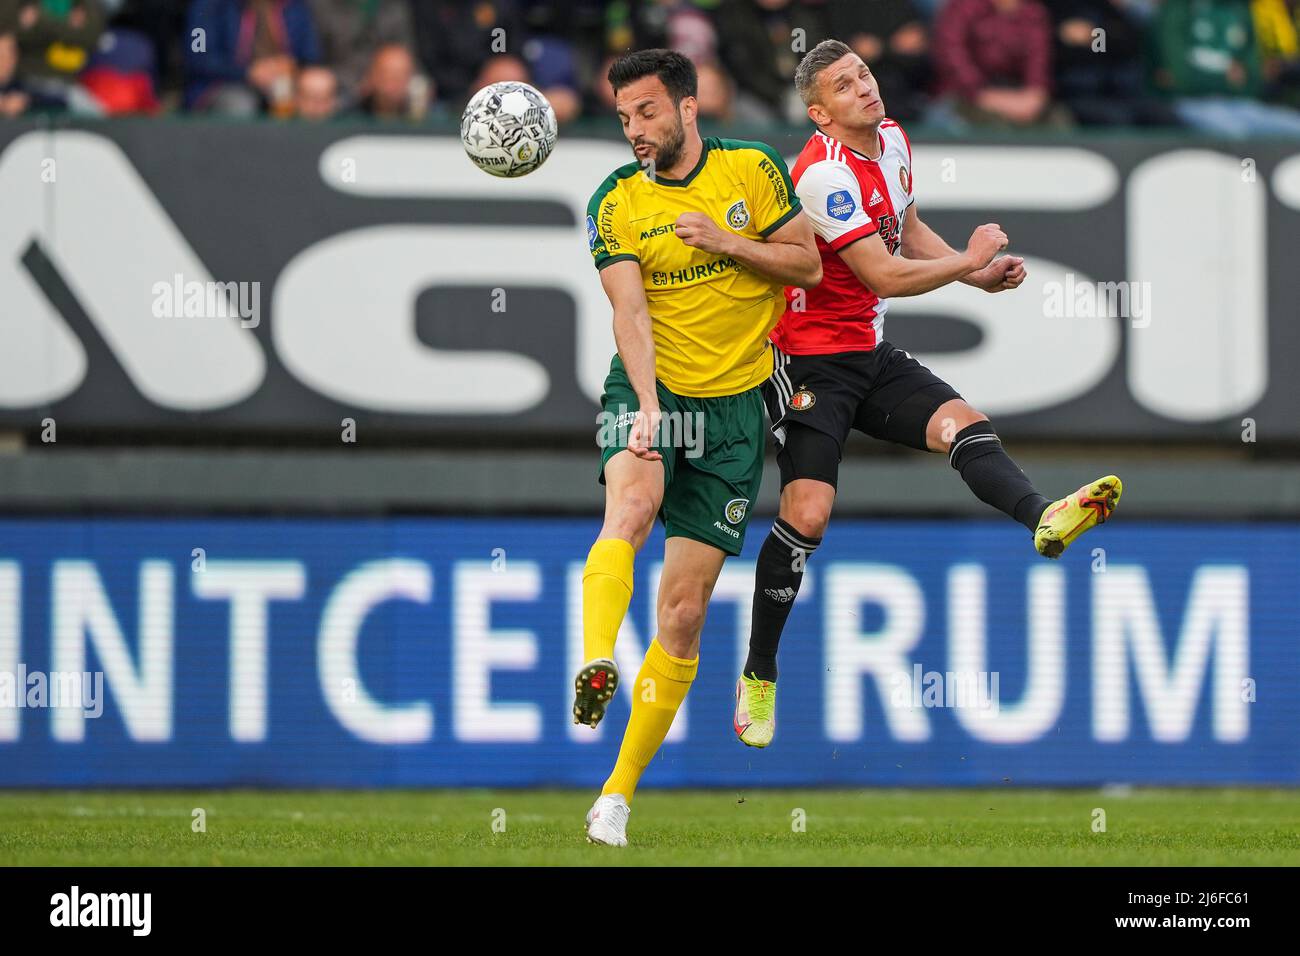 Sittard - Andreas Samaris of Fortuna Sittard, Bryan Linssen of Feyenoord during the match between Fortuna Sittard v Feyenoord at Fortuna Sittard Stadion on 1 May 2022 in Sittard, Netherlands. (Box to Box Pictures/Tom Bode) Stock Photo